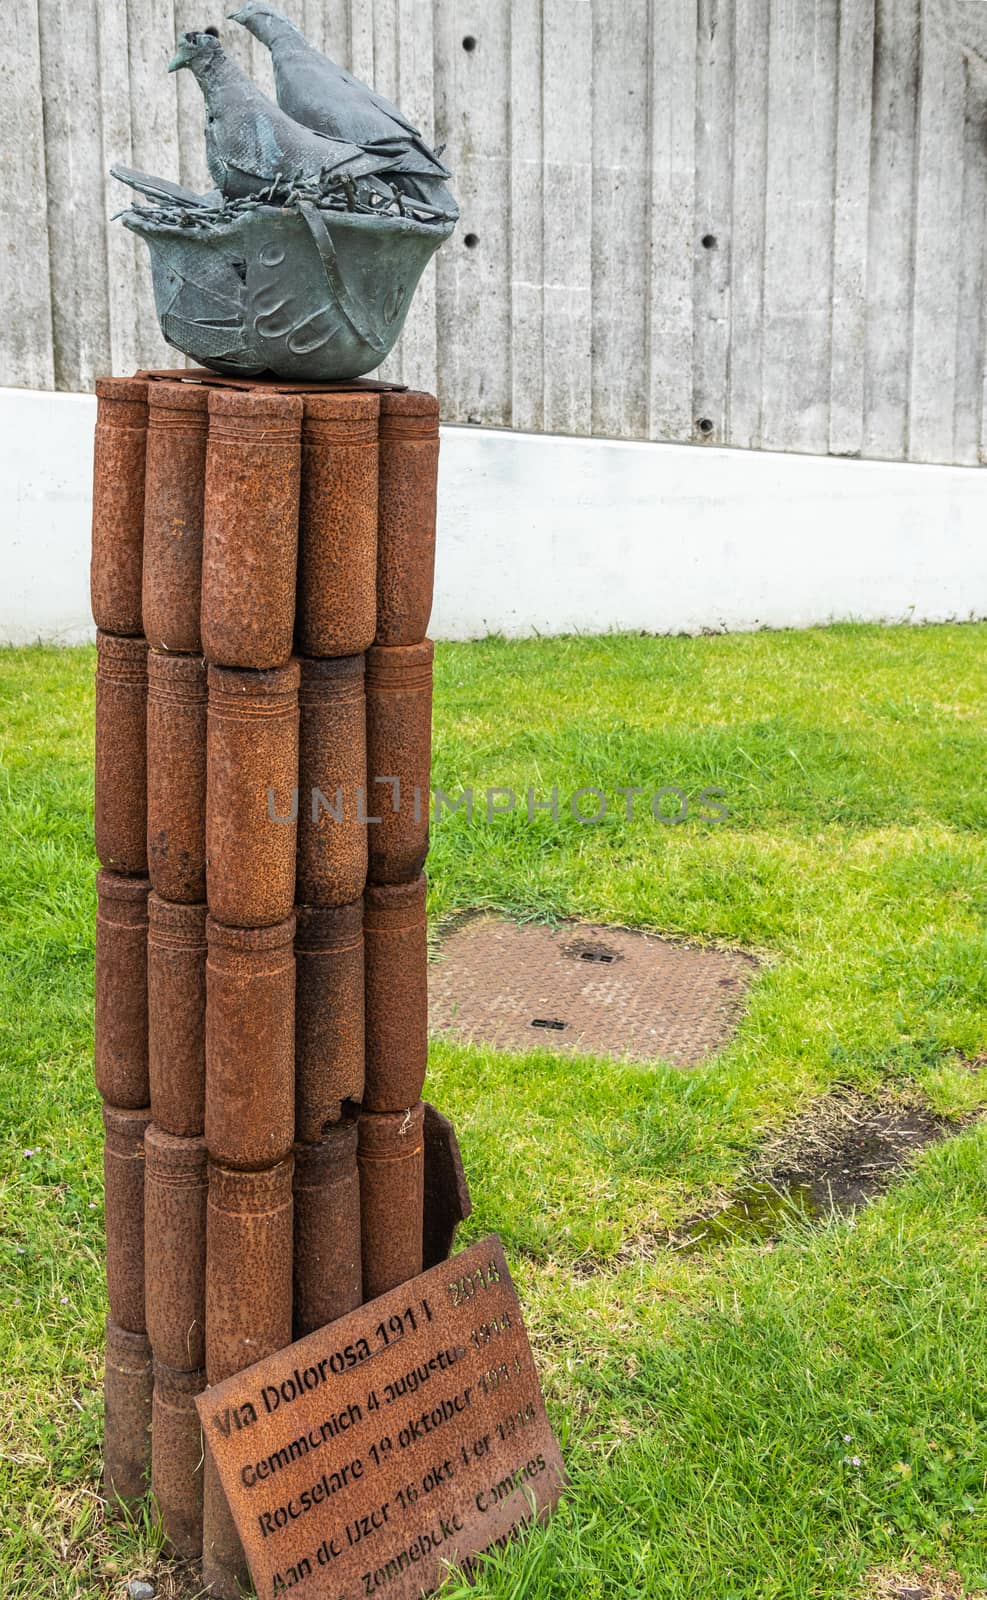 Diksmuide, Flanders, Belgium -  June 19, 2019: Old war-iron monument at IJzertoren, tallest peace monument of WW 1. Rusty bomb shells, pigeons in helmets, against gray wall, green lawn.